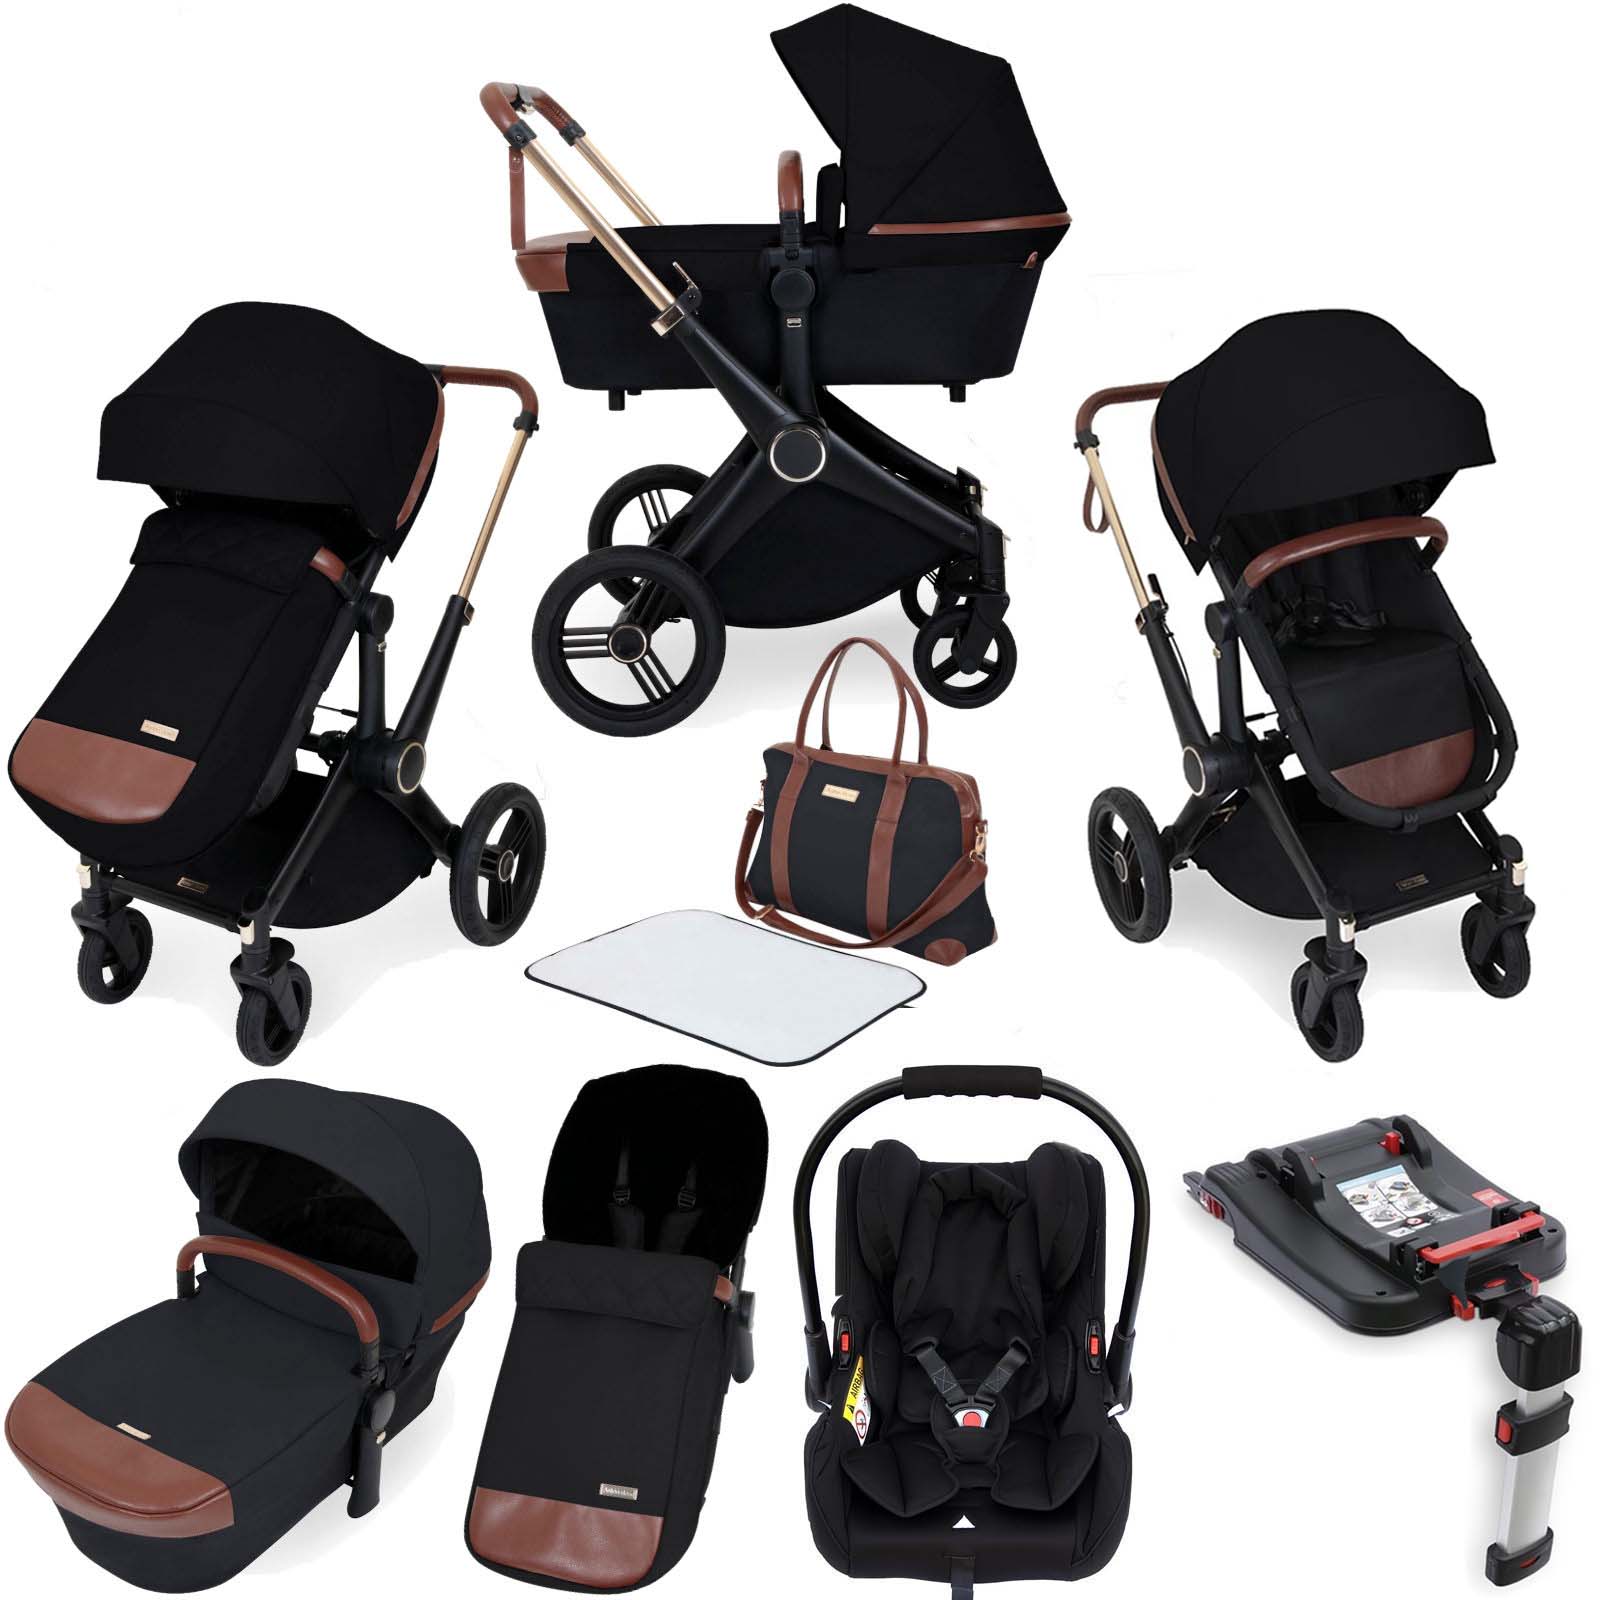 Ickle Bubba Aston Rose (Galaxy) 10 Piece Travel System Bundle with ISOFIX Base - Black